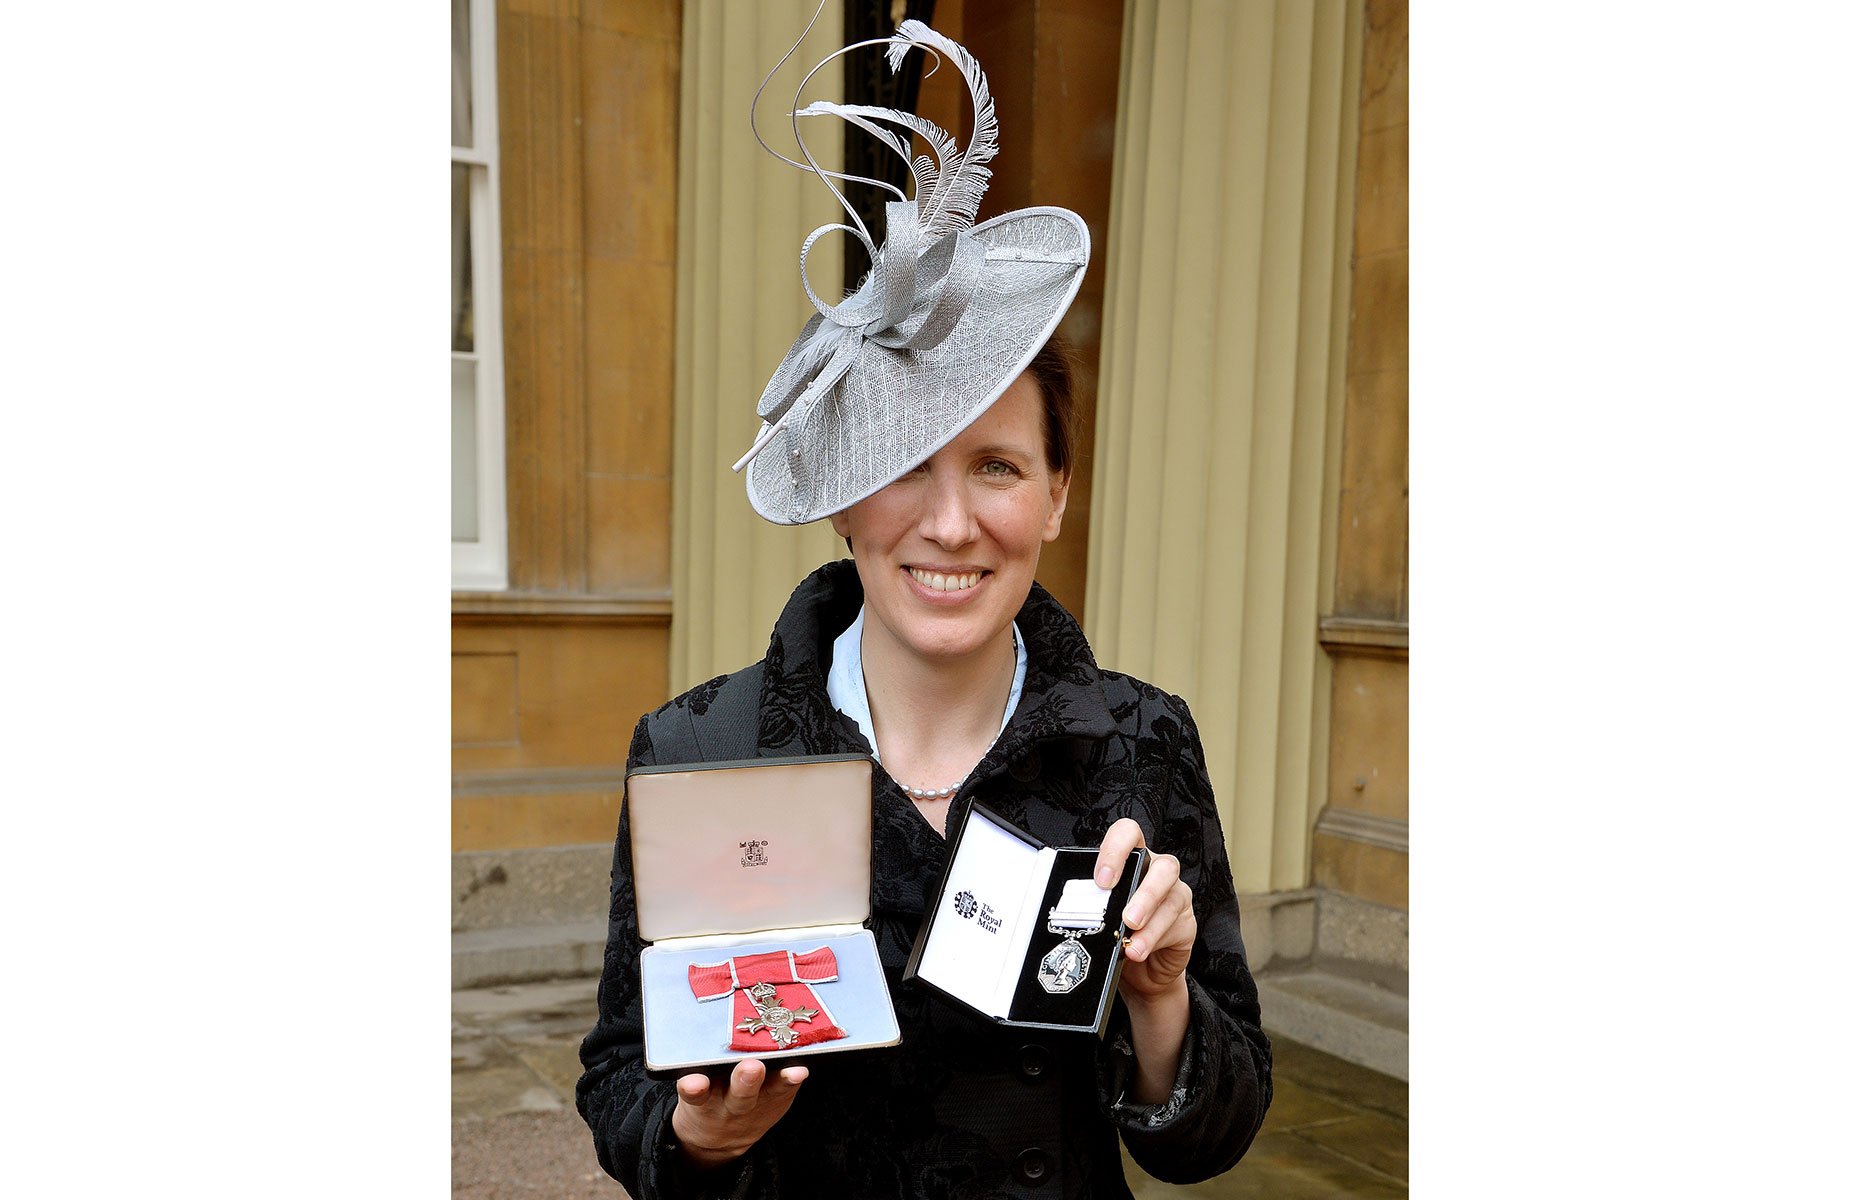 Felicity Aston collecting her MBE in March 2015 (Image: John Stillwell - WPA Pool/Getty Images)